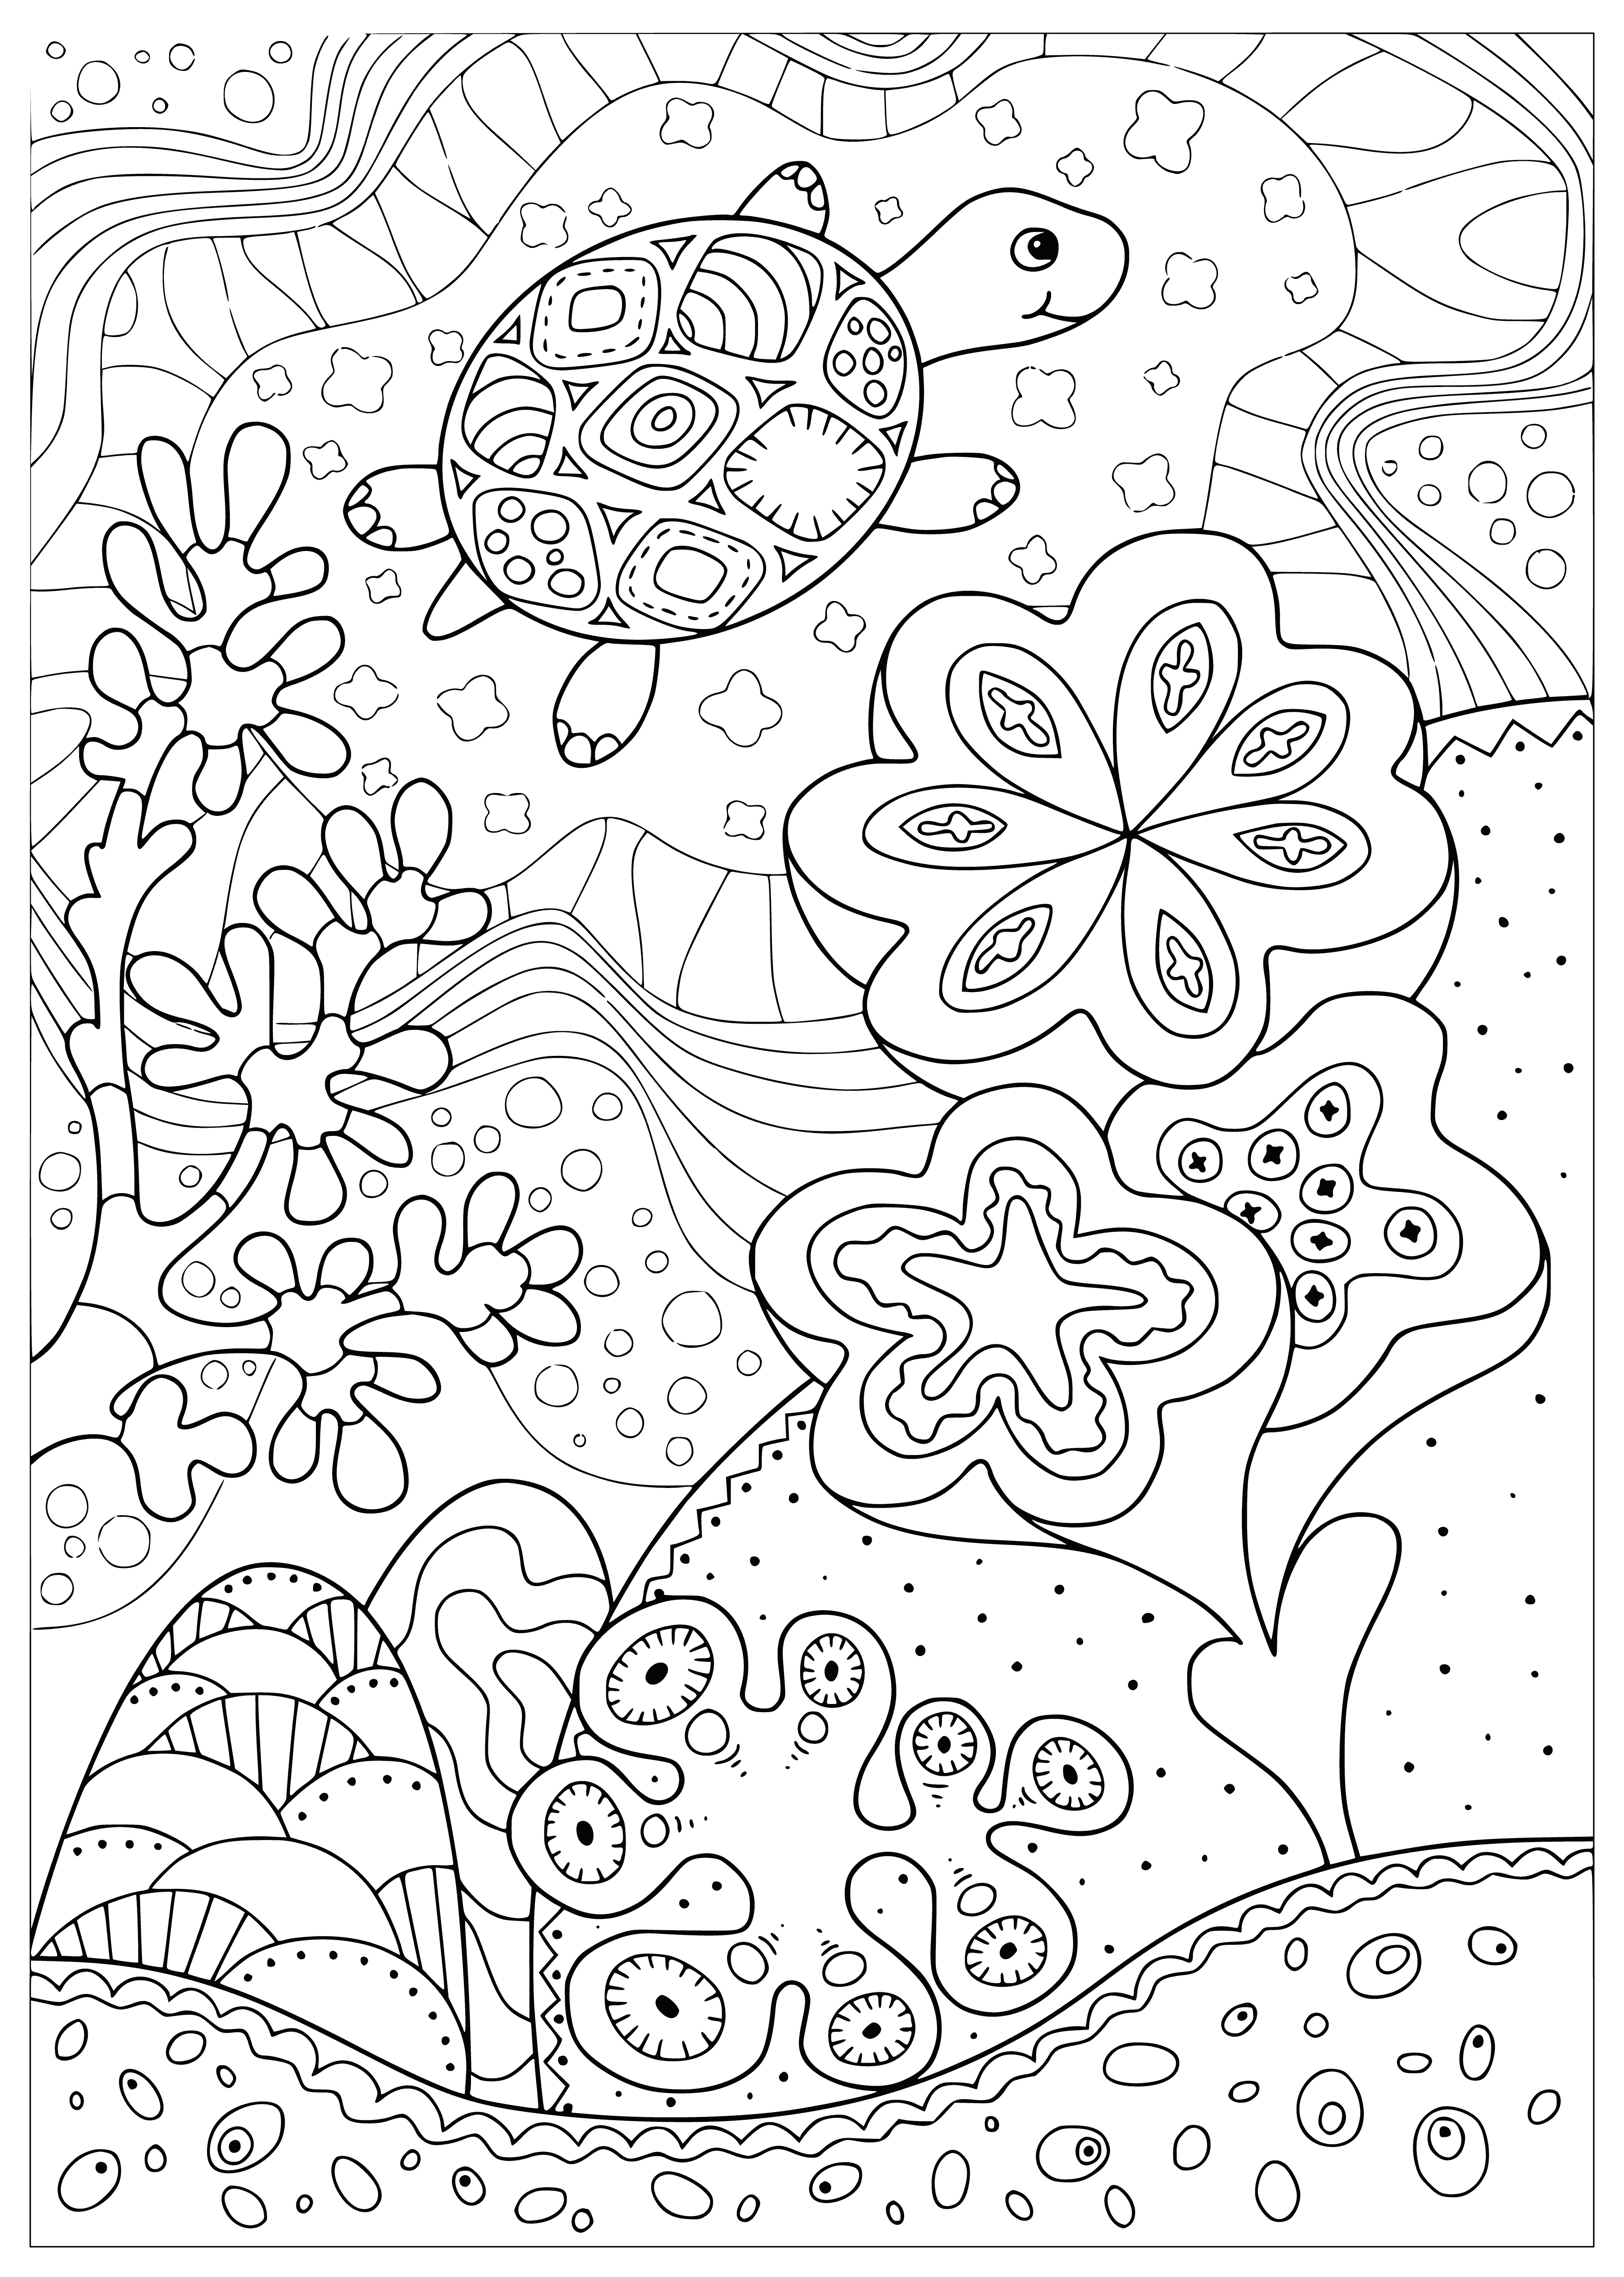 coloring page: Large sea turtle swimming in colorful coral reef; dark combined w/light undershell; long neck & tail; powerful flippers; lots of different fish.